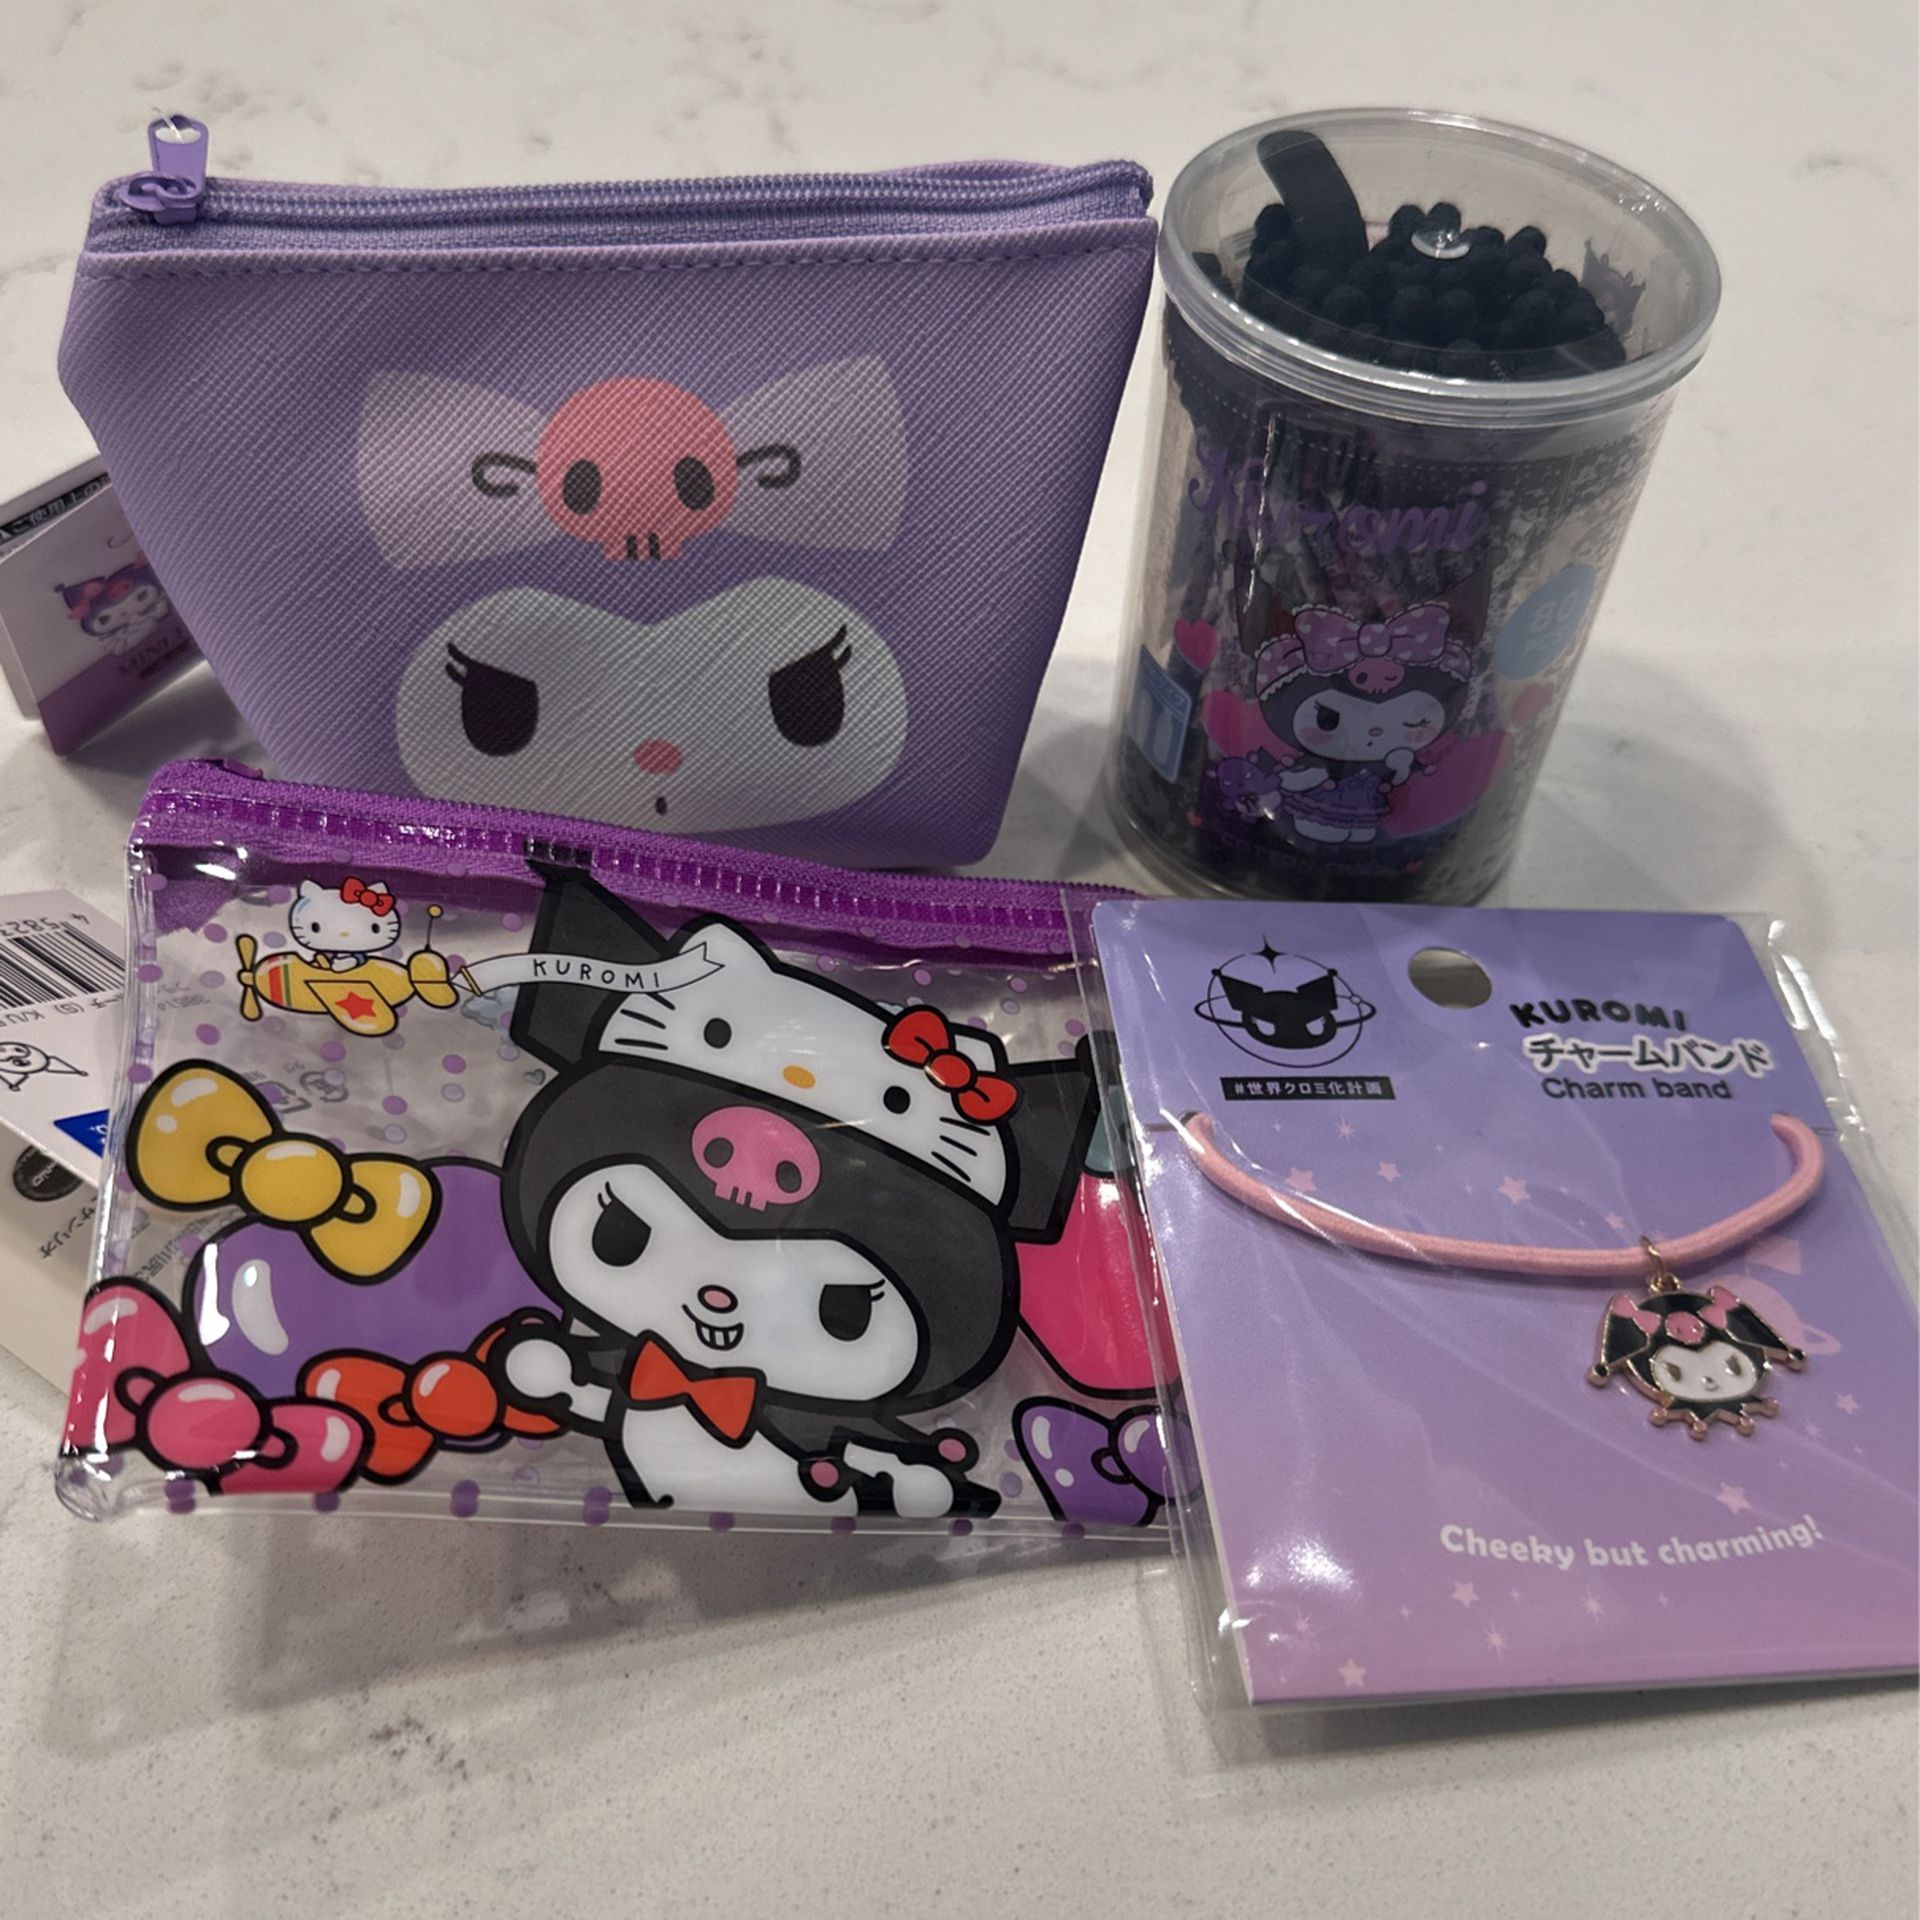 New Sanrio Kuromi 2 Pourch, Charm Band and Cotton Swabs 